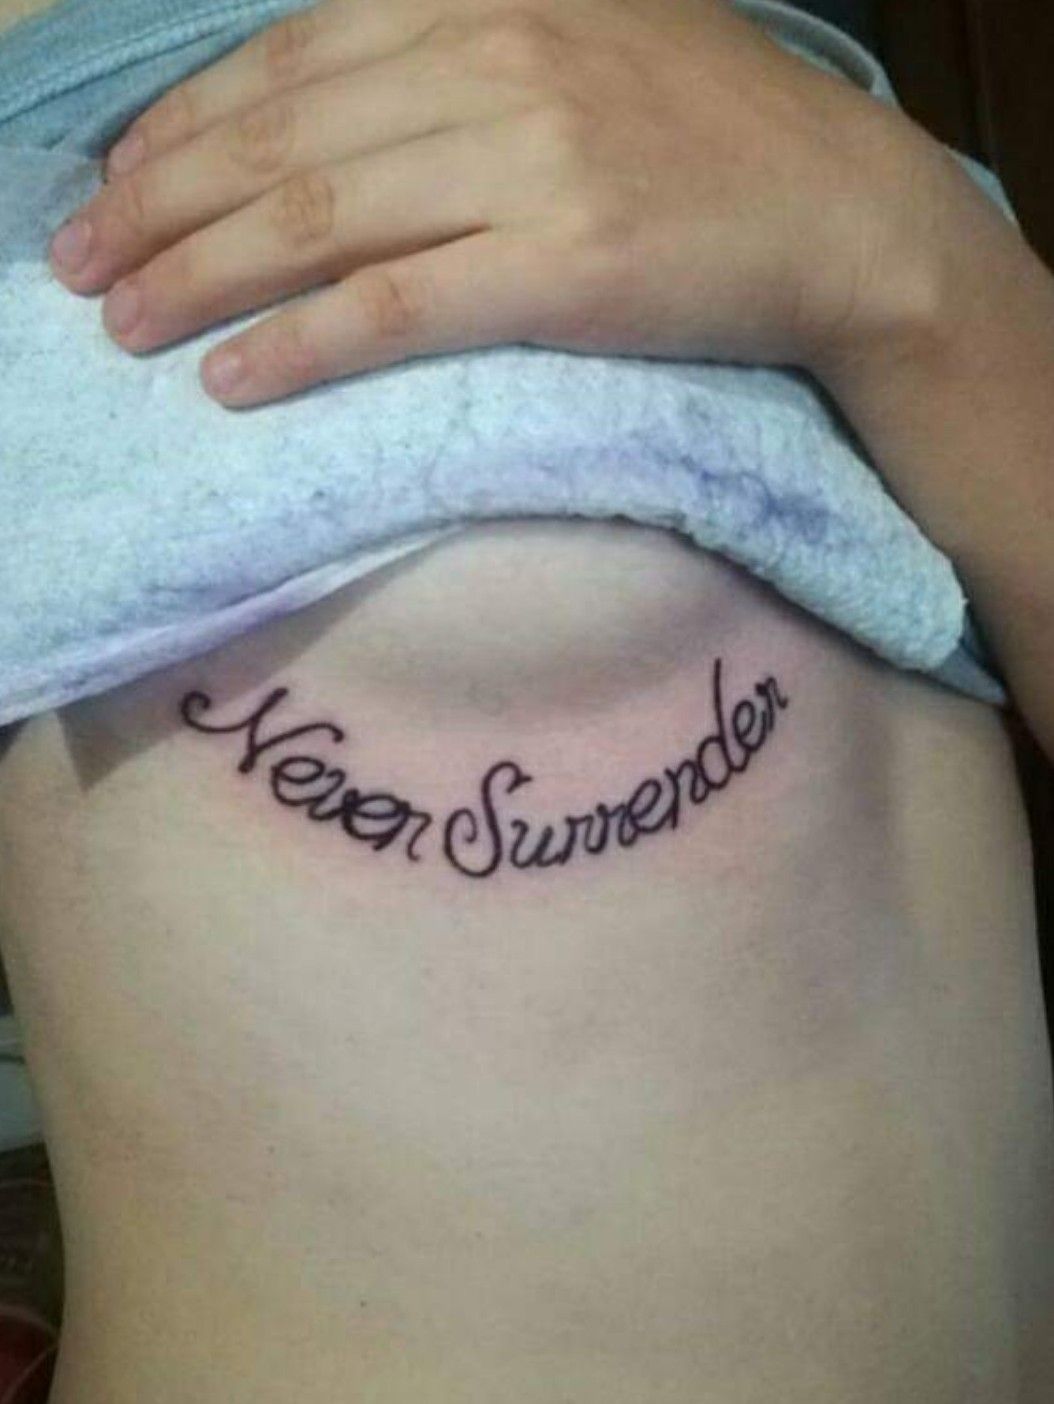 We Shall Never Surrender tattoo